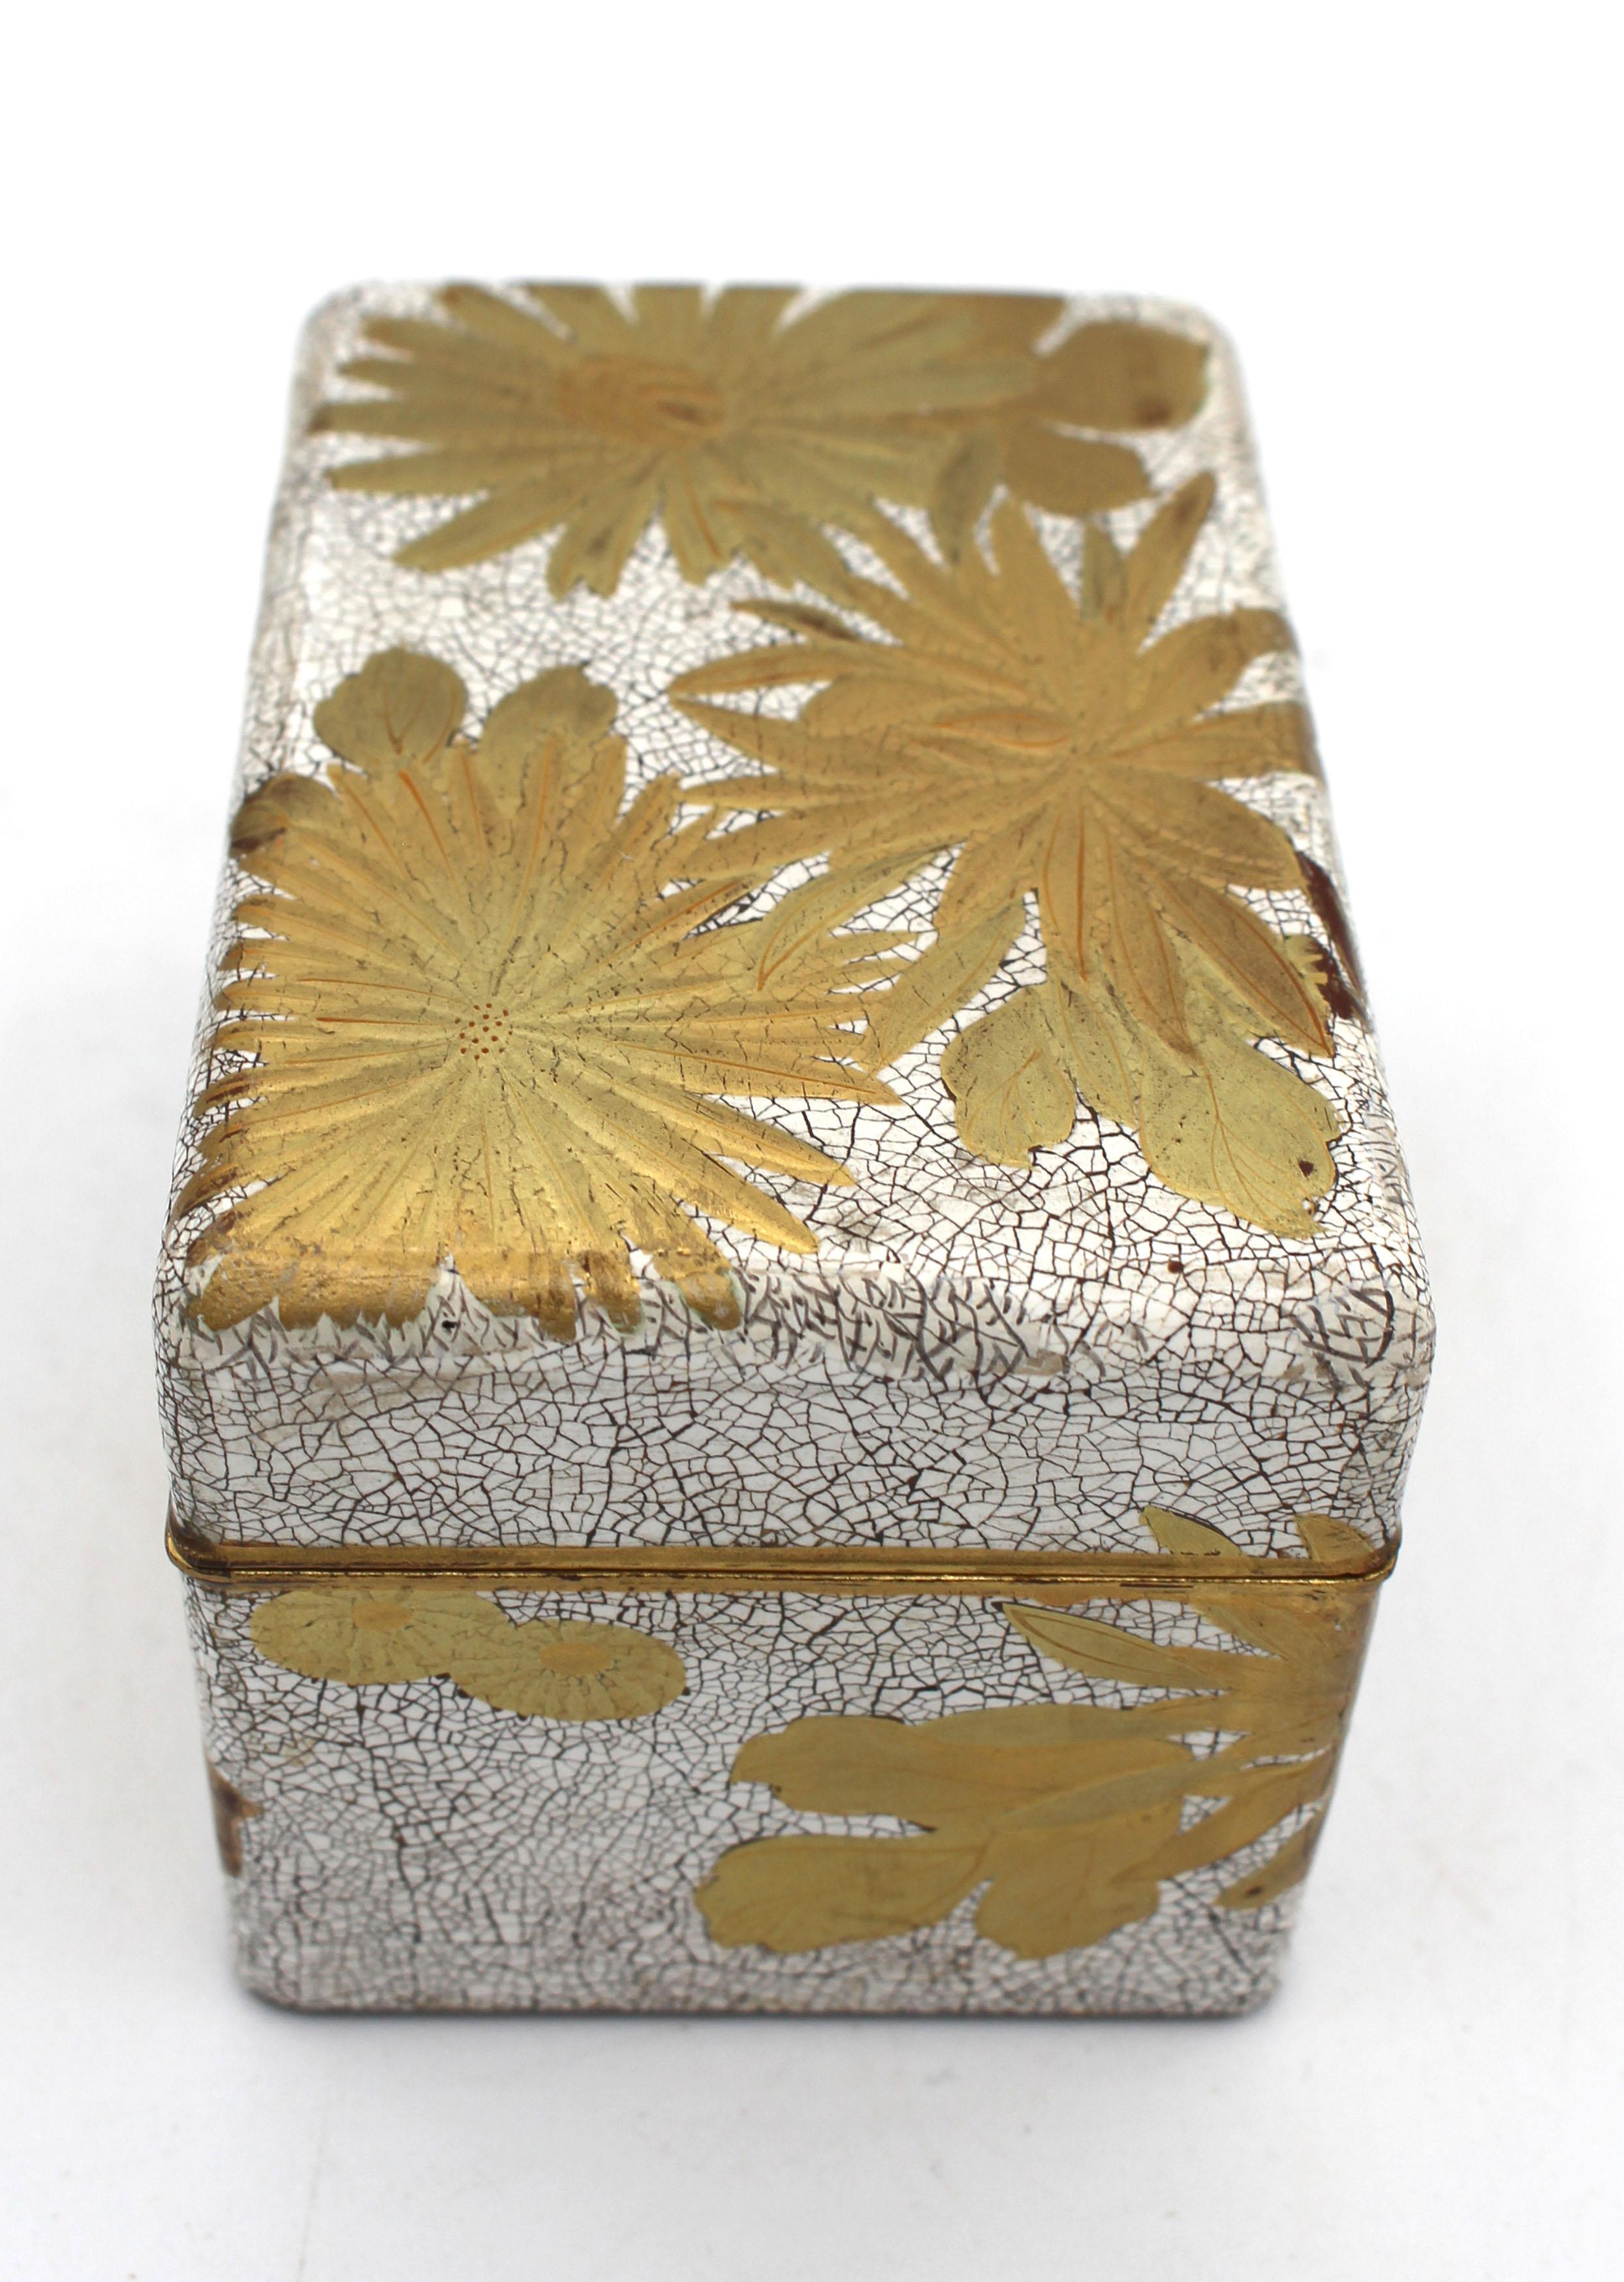 Early 20th Century Lacquer Box, Japanese. Late Meiji period For Sale 4